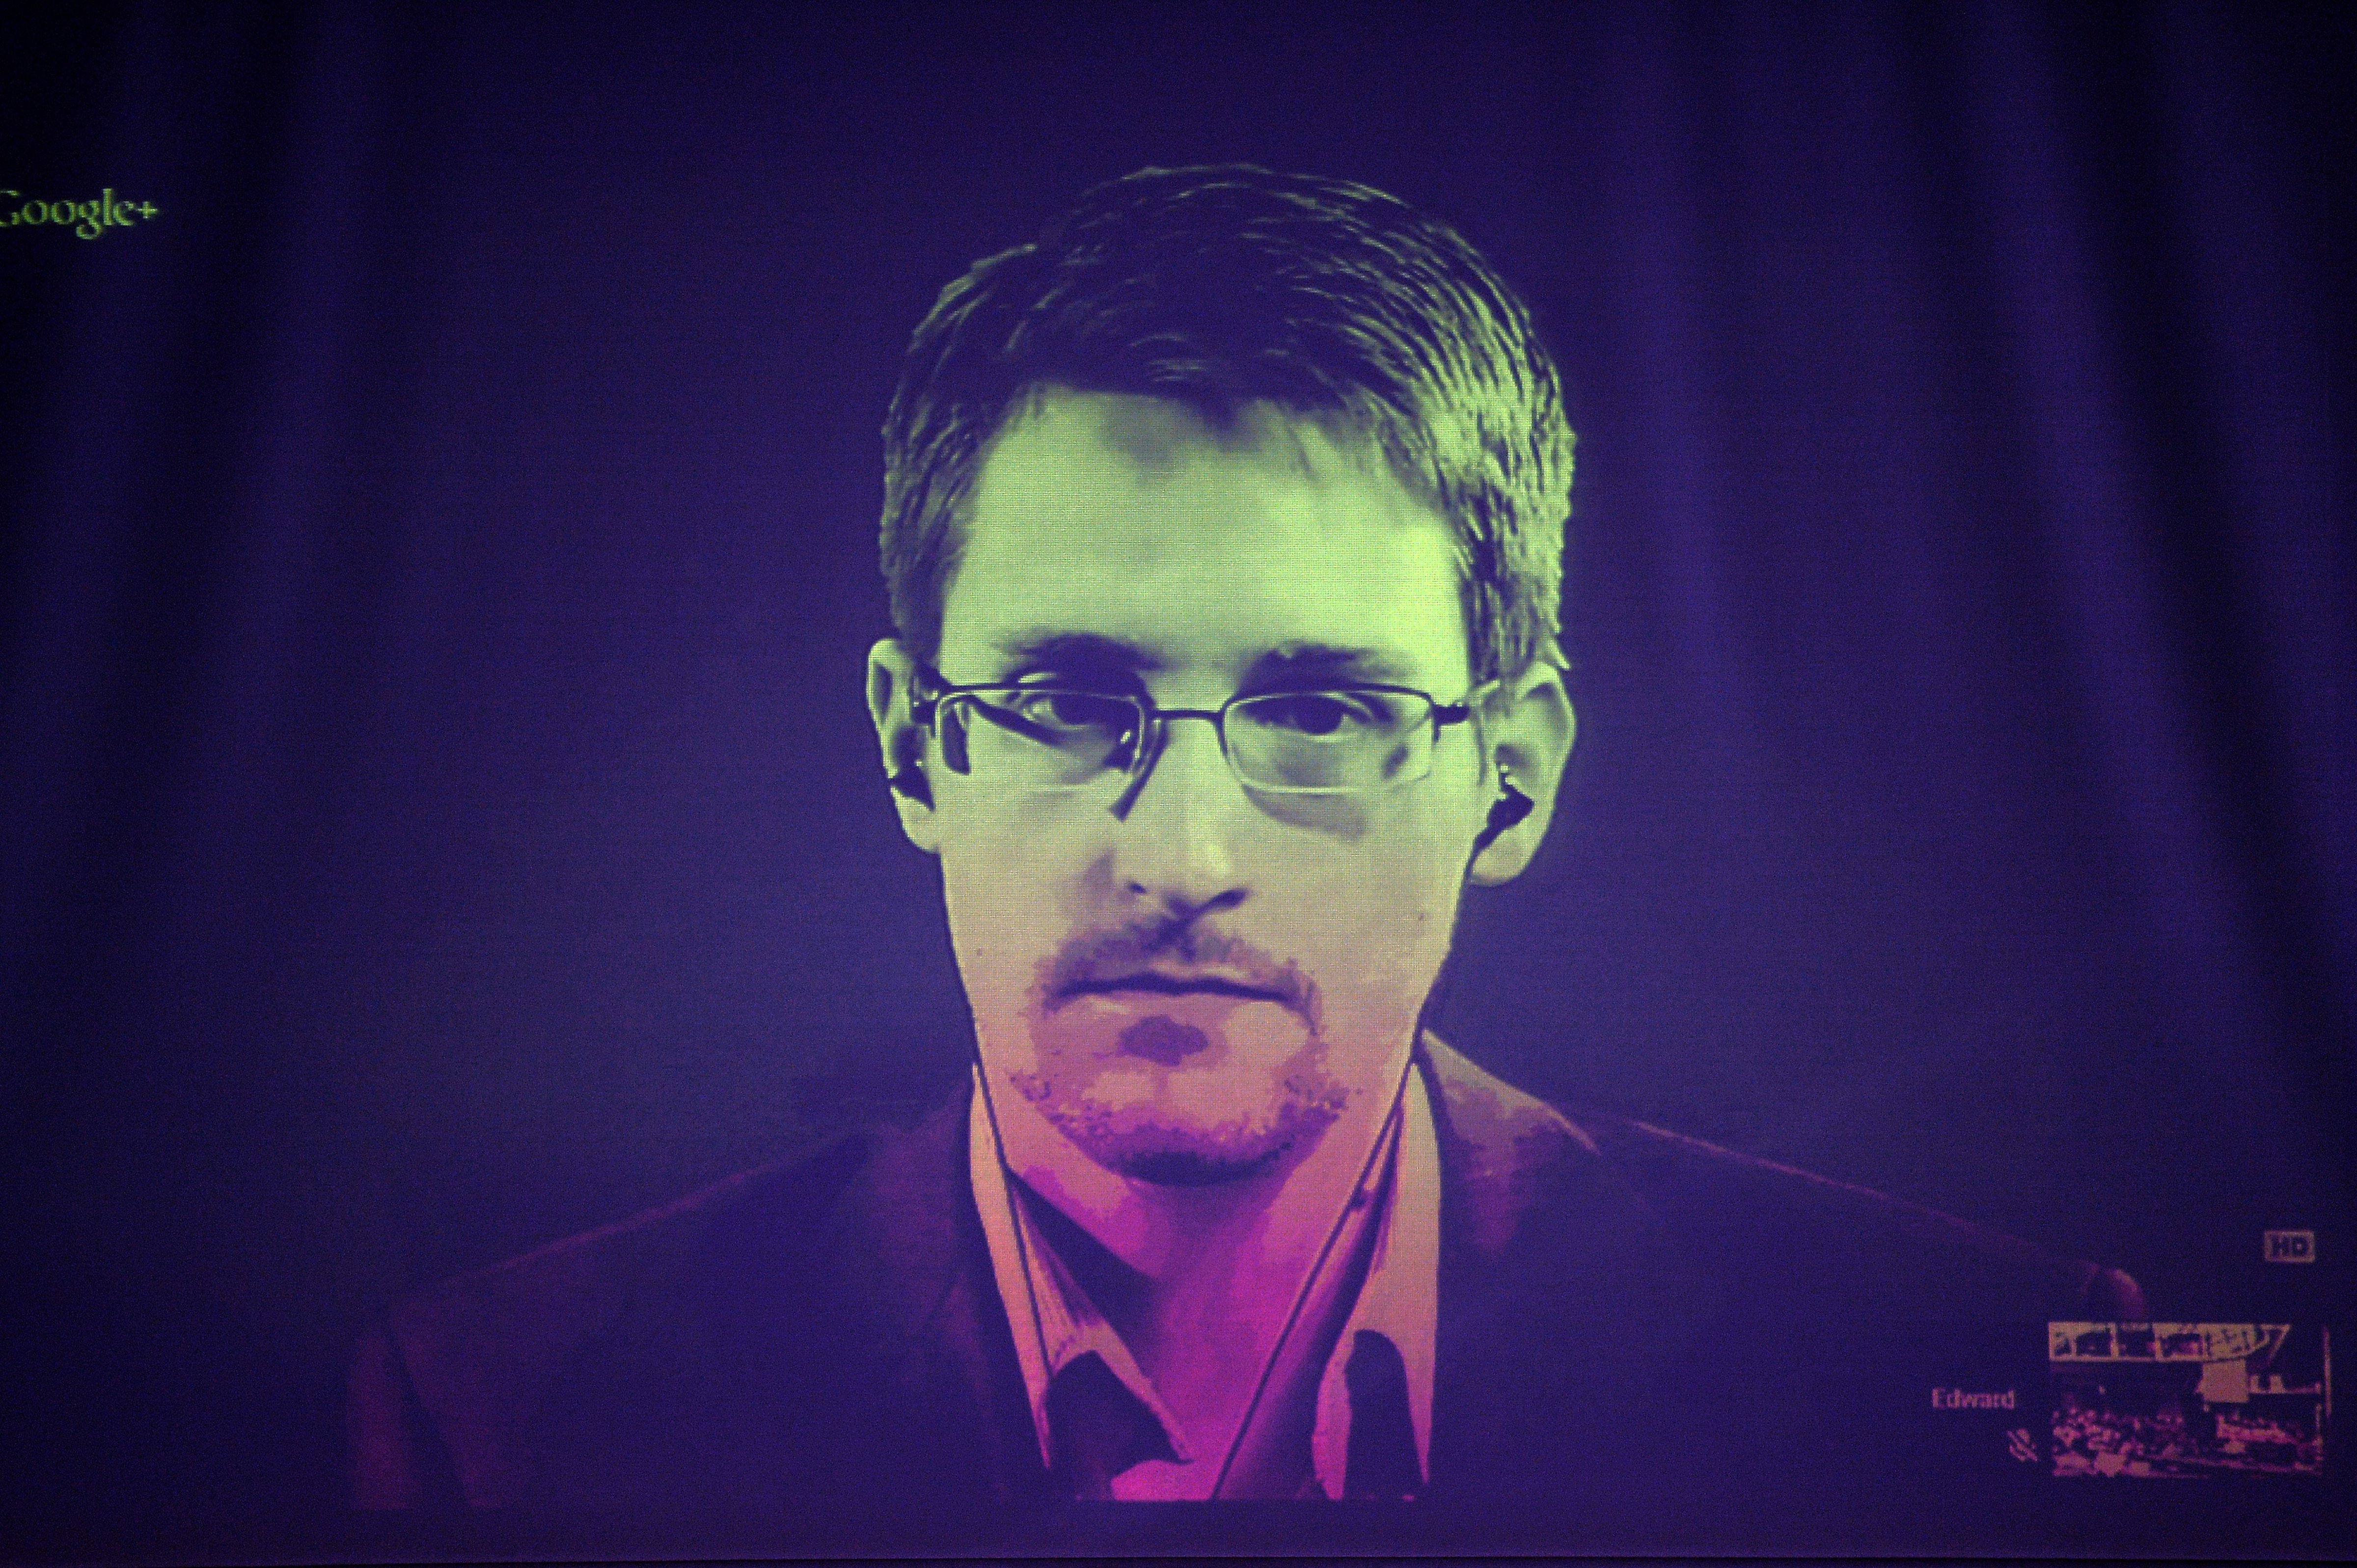 U.S. National Security Agency (NSA) whistleblower Edward Snowden speaks to European officials via videoconference during a parliamentary hearing on improving the protection of whistleblowers, at the Council of Europe in Strasbourg, eastern France, on June 24, 2014. (Frederick Florin—AFP/Getty Images)